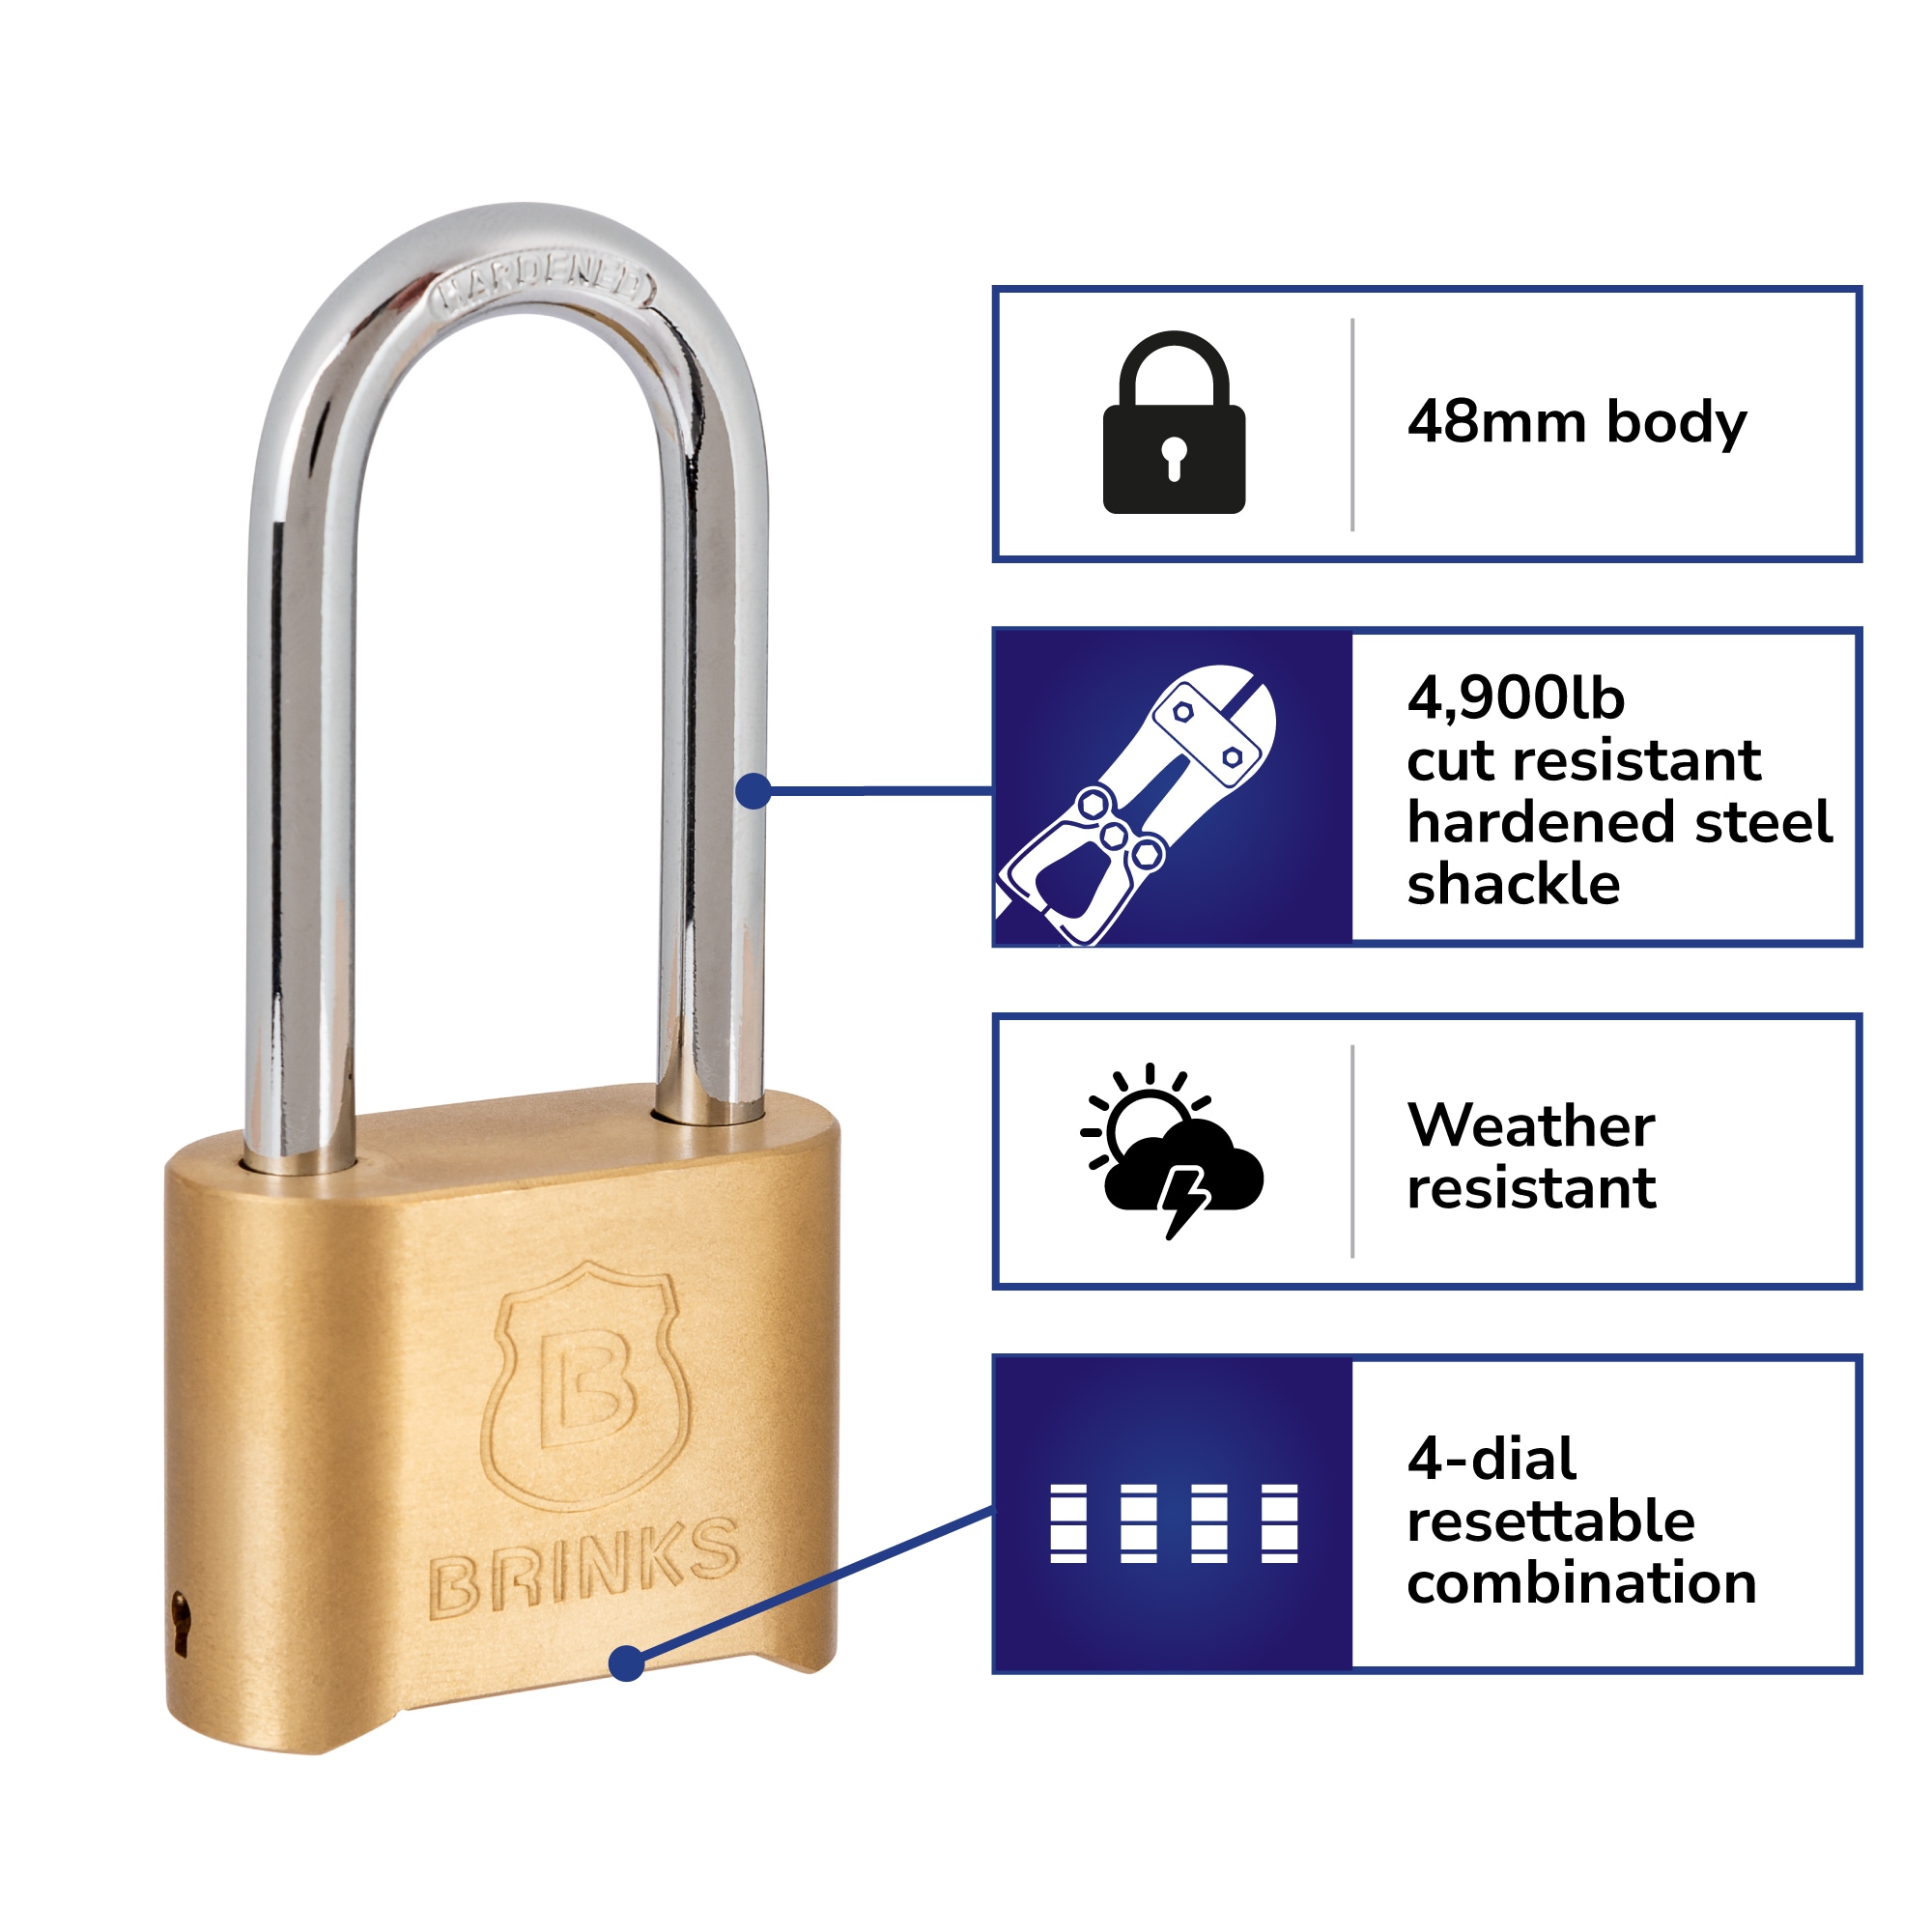 Solid Brass Lock and Key,Pad Lock with 1-9/16 in. (40 mm) Wide Lock Body,  2-1/2 in. Long Shackle Gate Padlock for Outdoor Fence， Sheds, Storage Unit